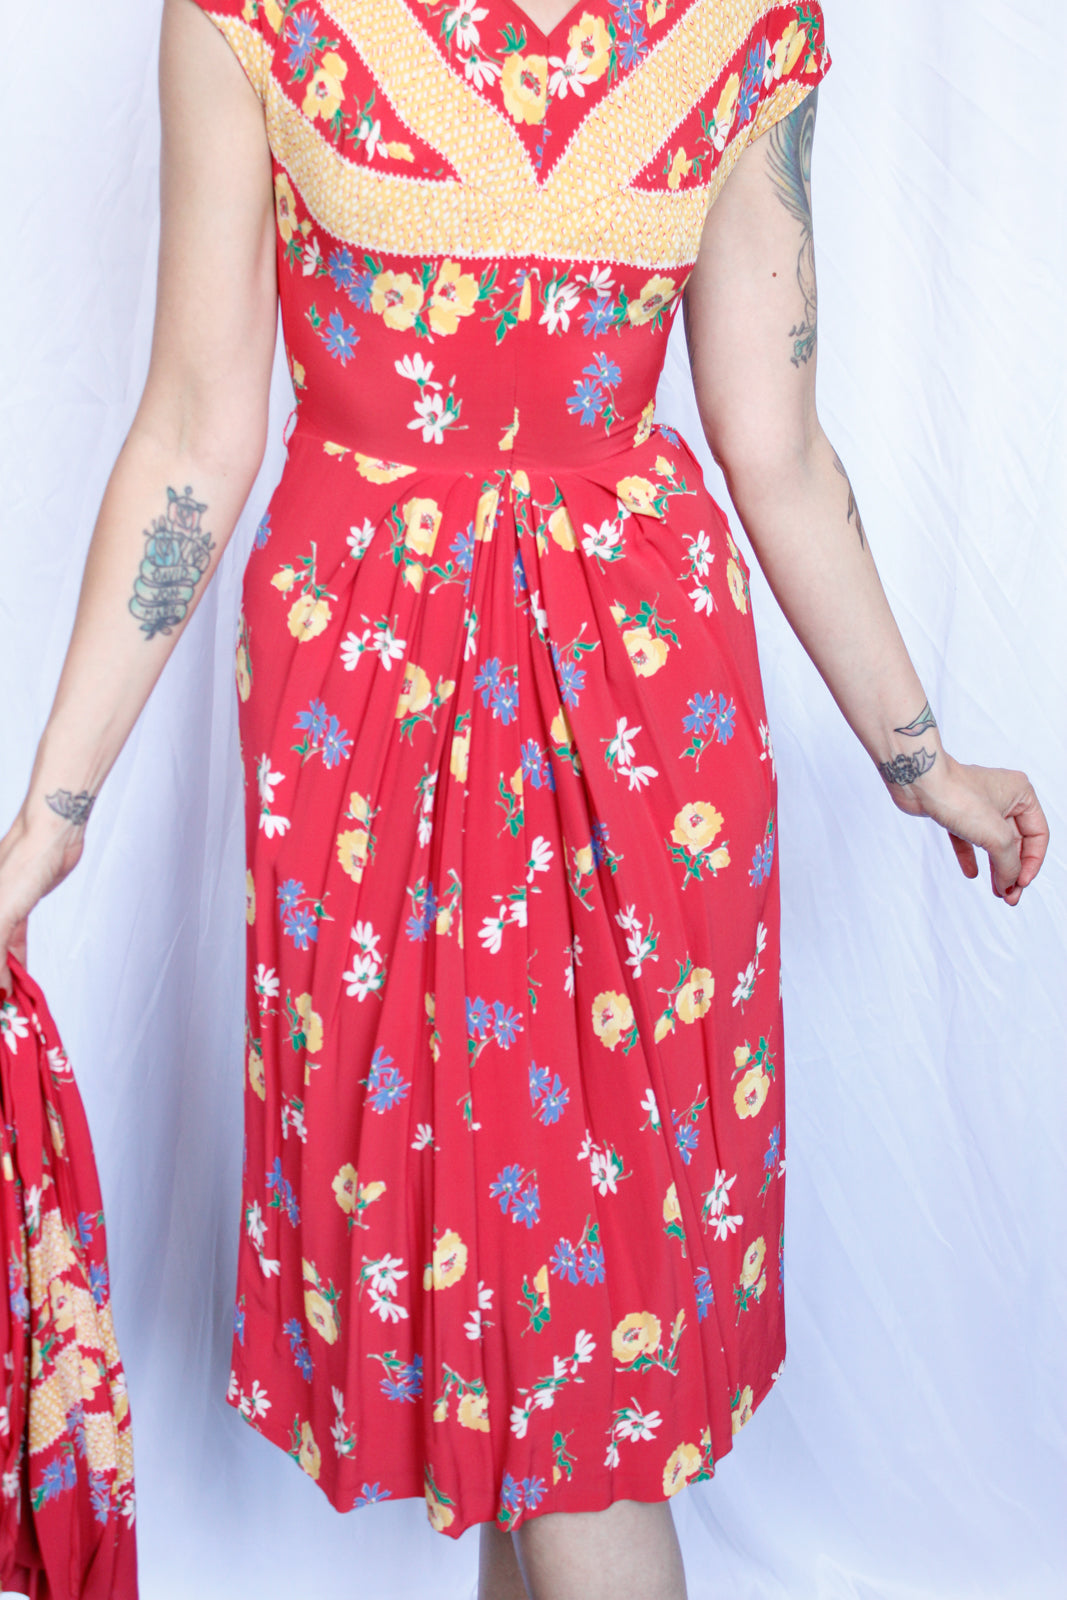 1940s Doris Dodson Rayon Floral Dress with Scarf - Xsmall 